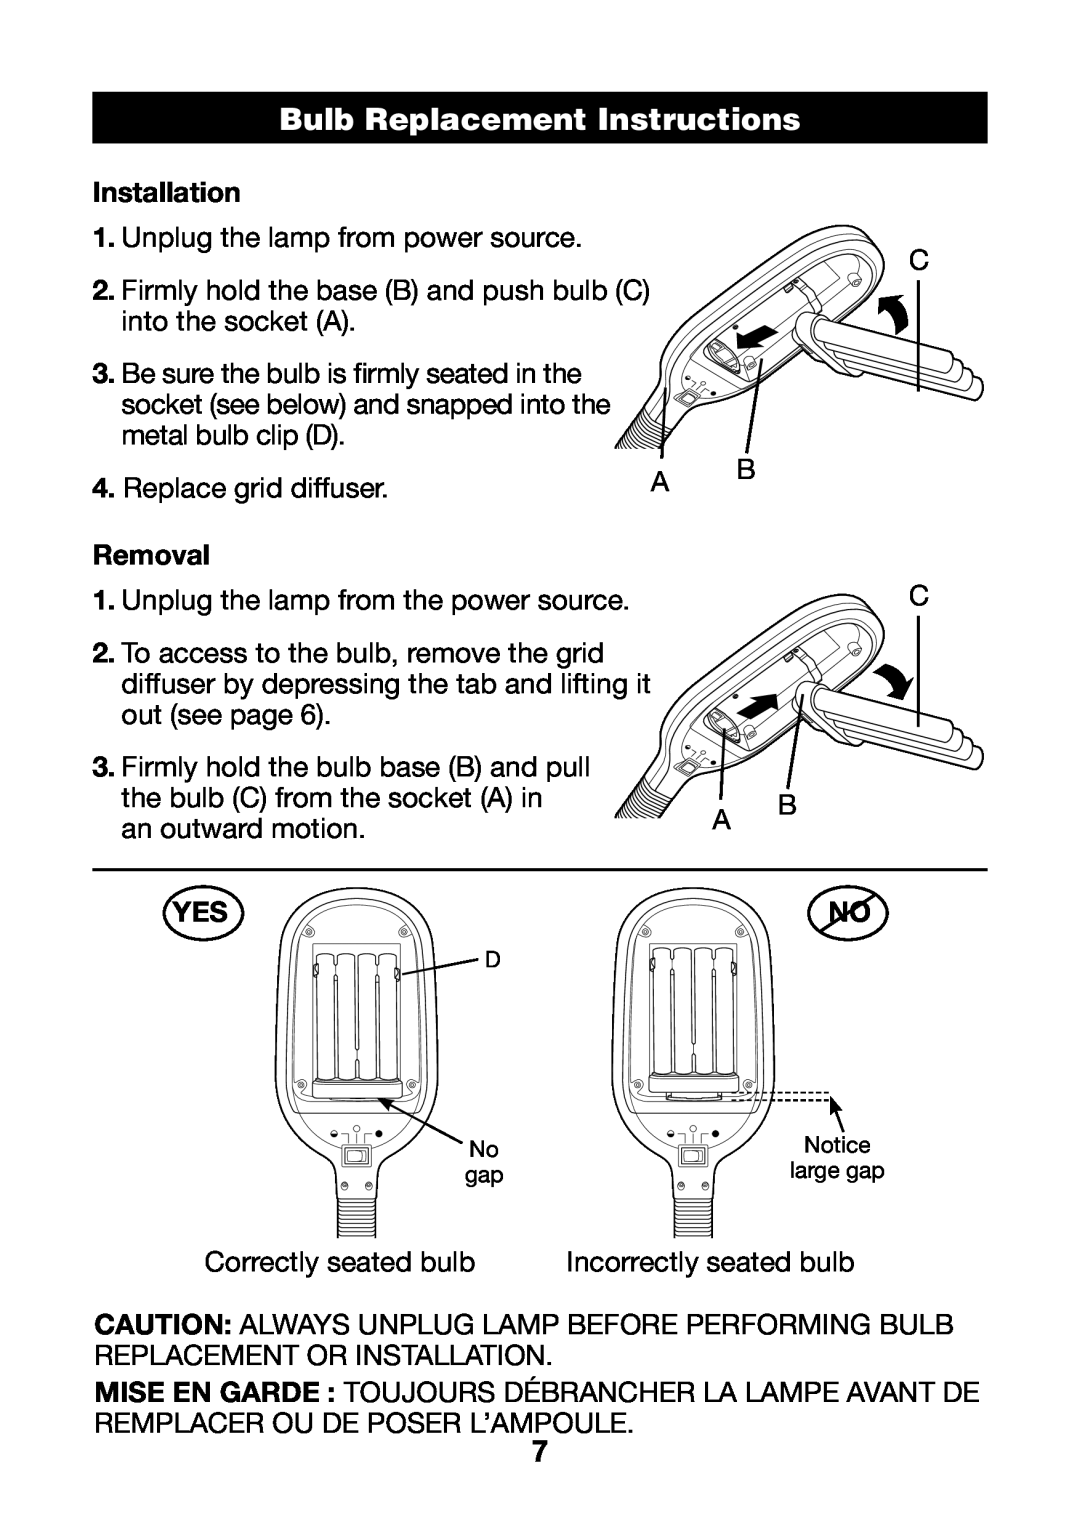 Verilux PL03 manual Bulb Replacement Instructions, Installation, Removal 